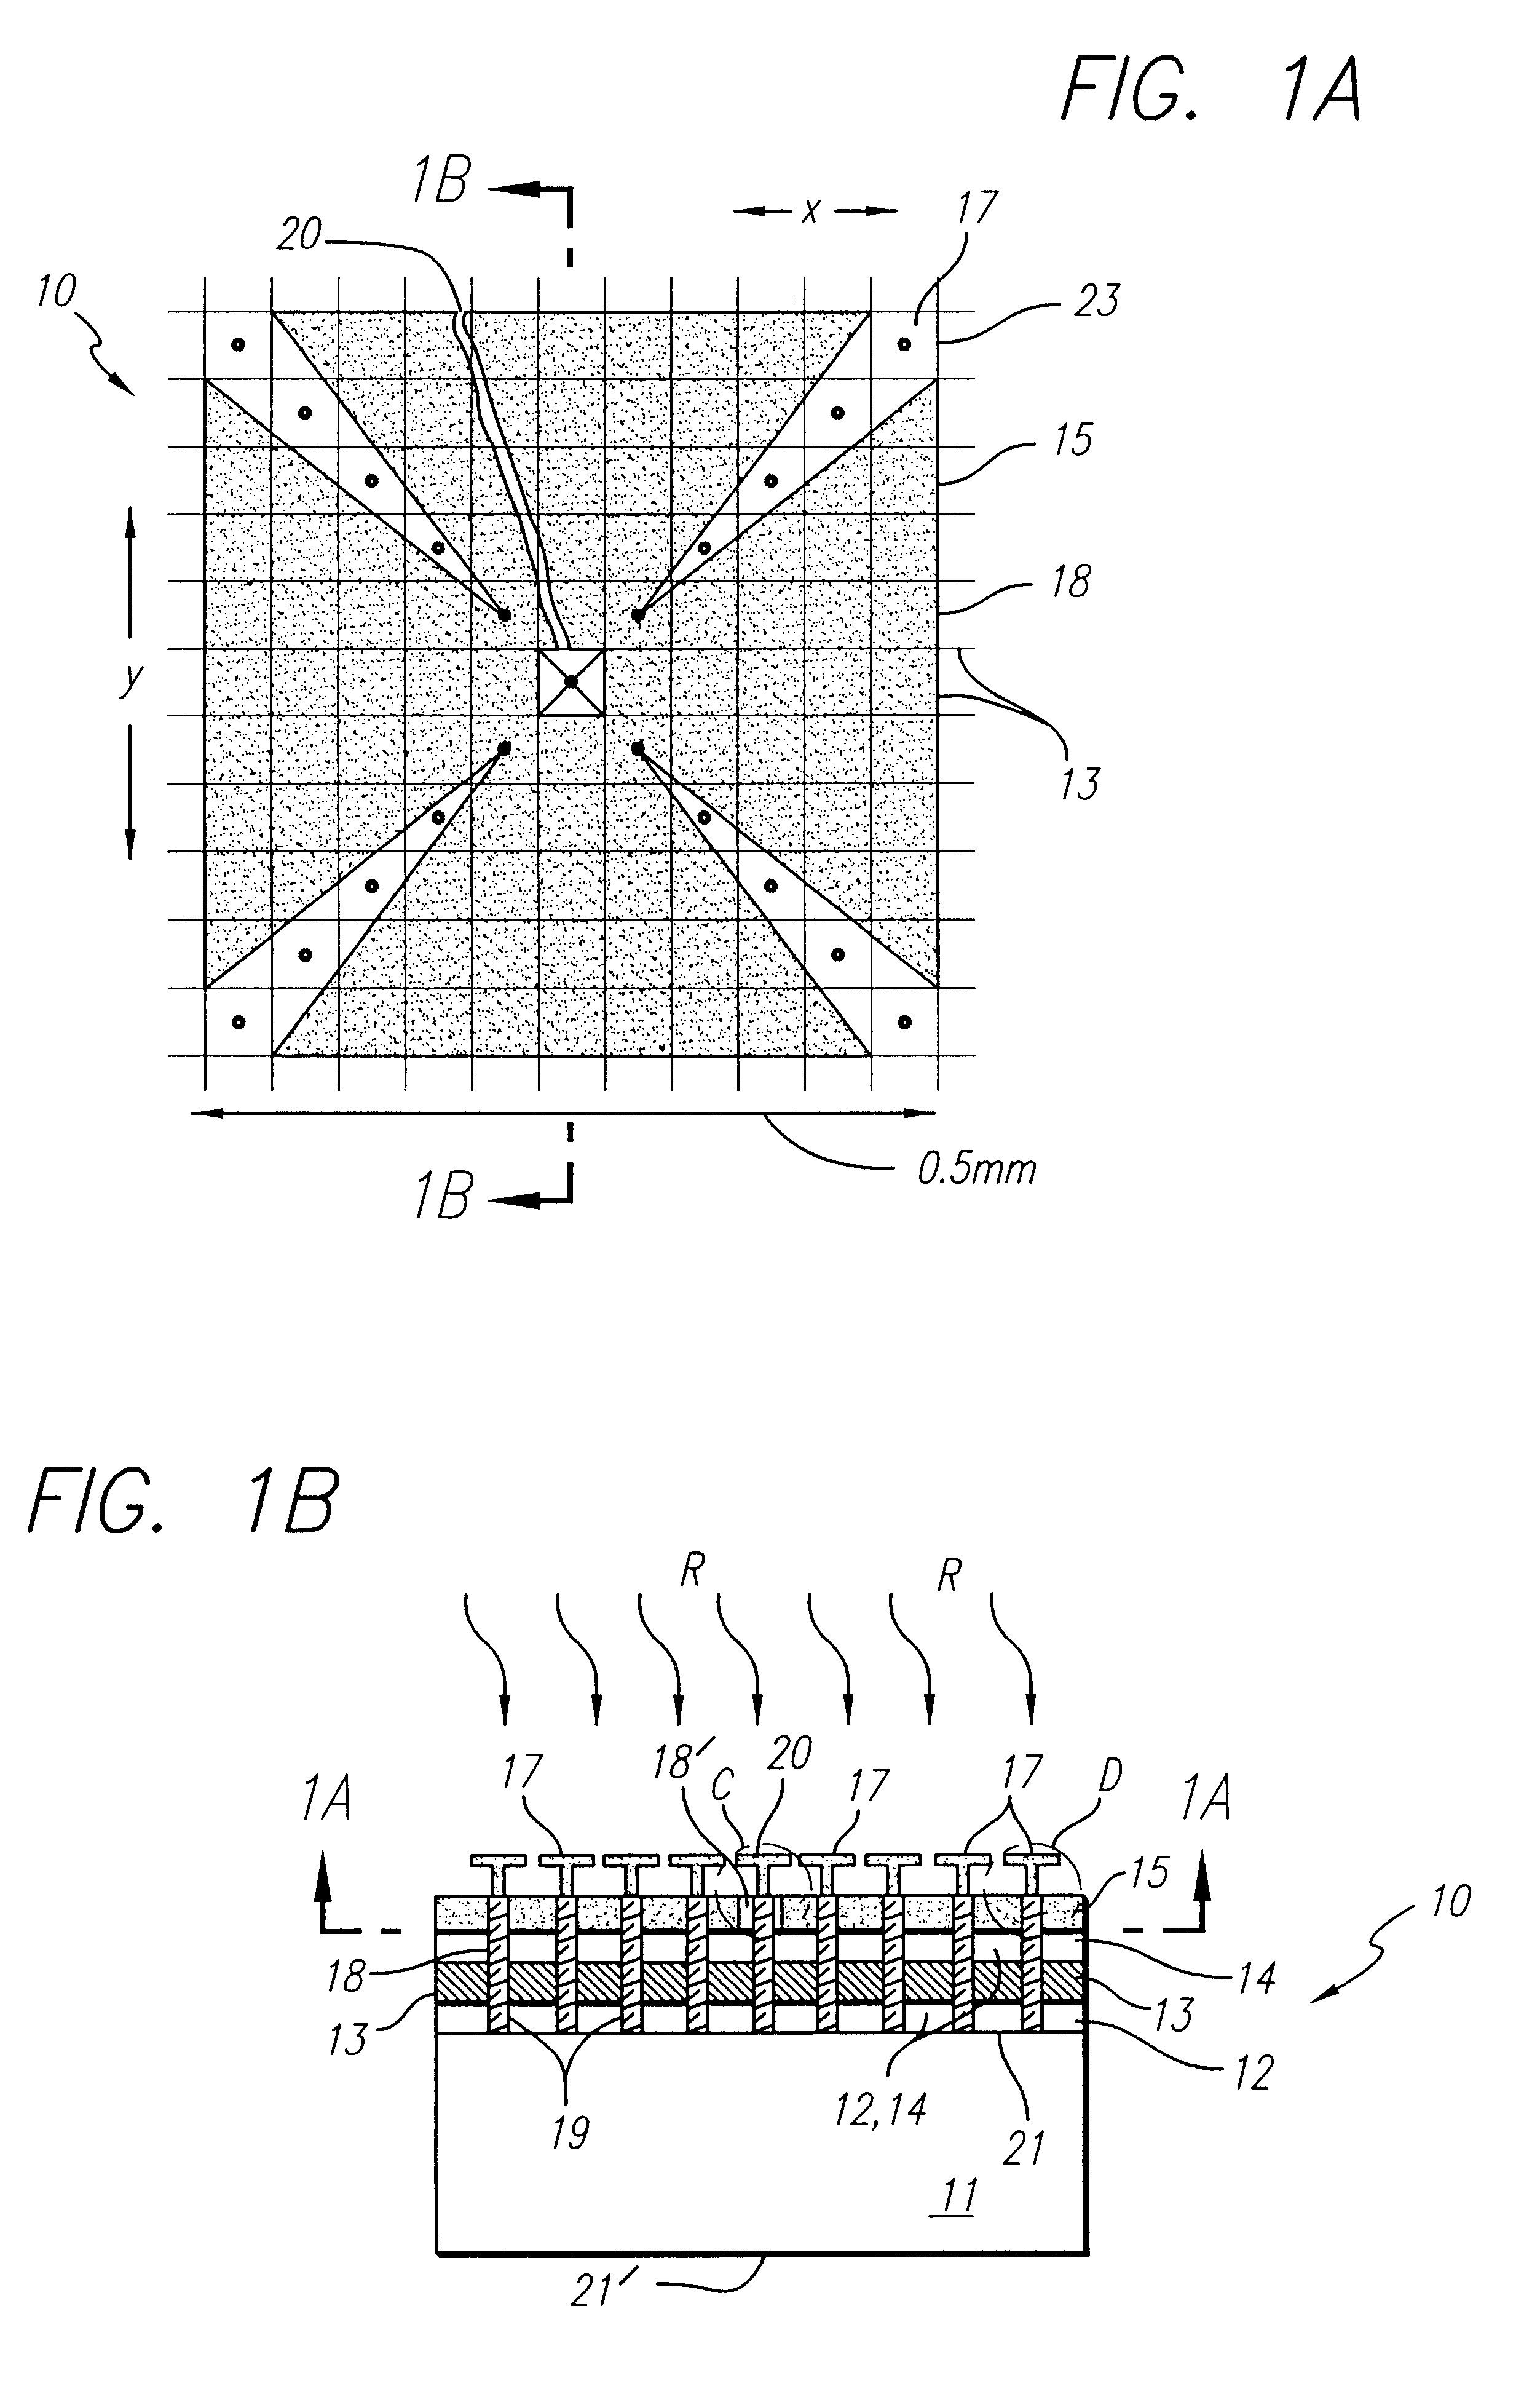 Mm-wave/IR monolithically integrated focal plane array